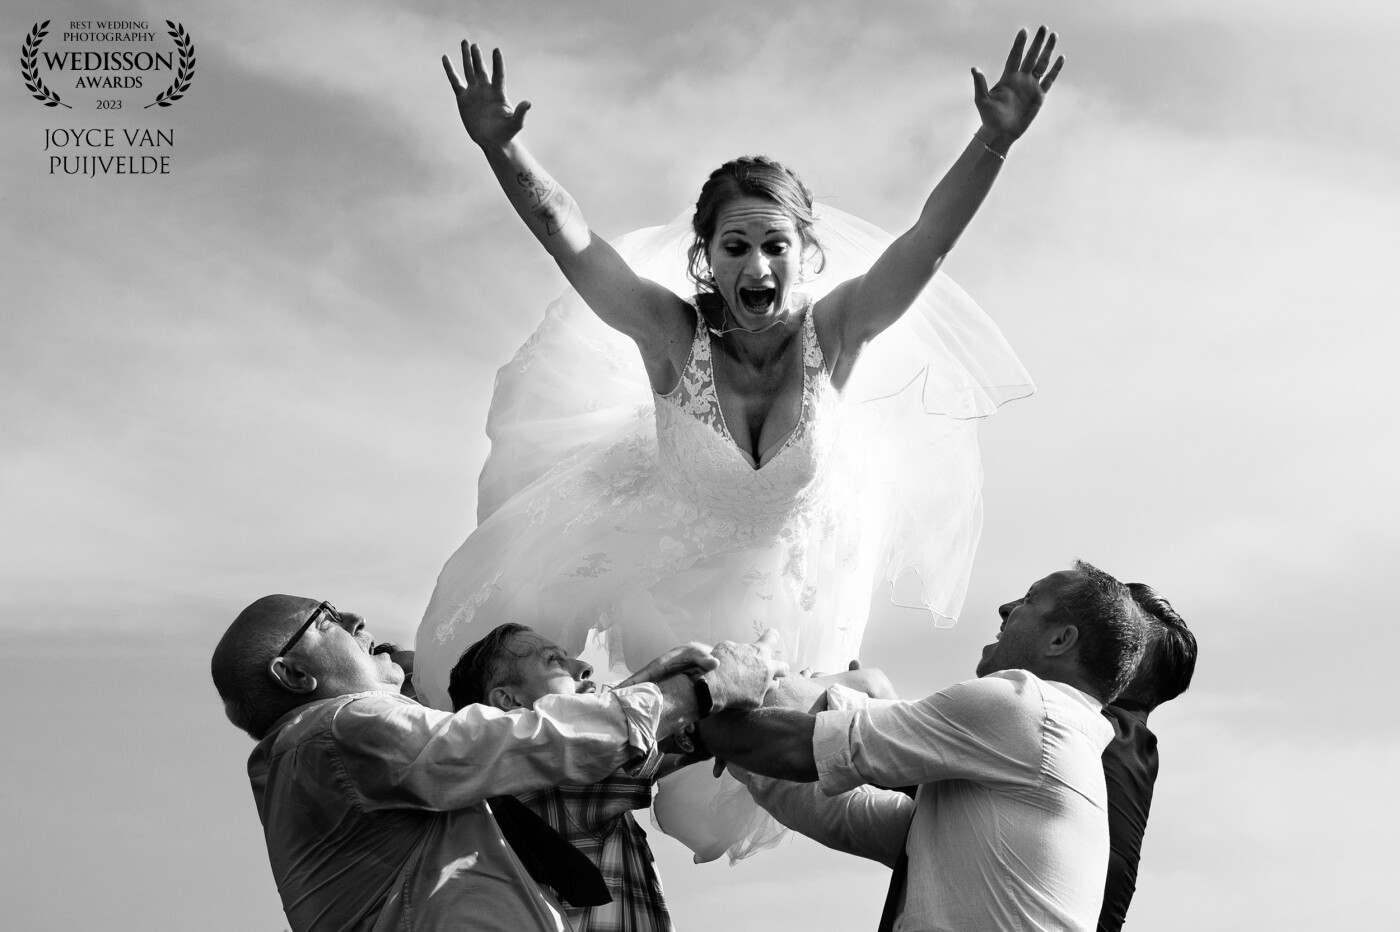 Flying newlyweds, we see them more often, but this remains too fun! It adds an extra enjoyable experience to taking family photos